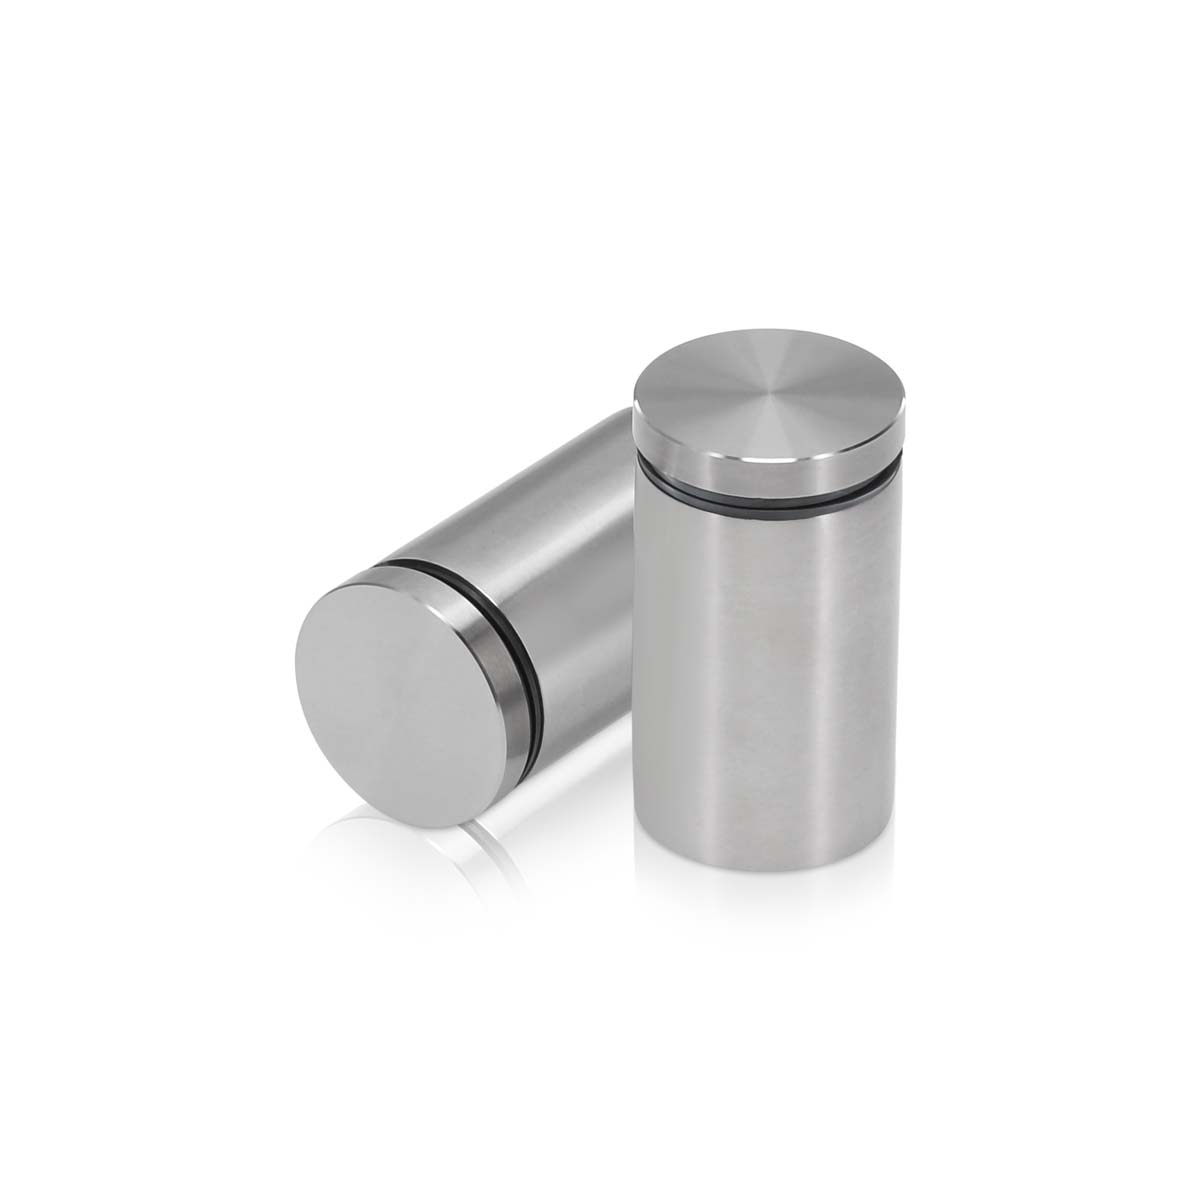 1-1/4'' Diameter X 1-3/4'' Barrel Length, Hollow Stainless Steel Brushed Finish. Easy Fasten Standoff (For Inside Use Only) [Required Material Hole Size: 7/16'']